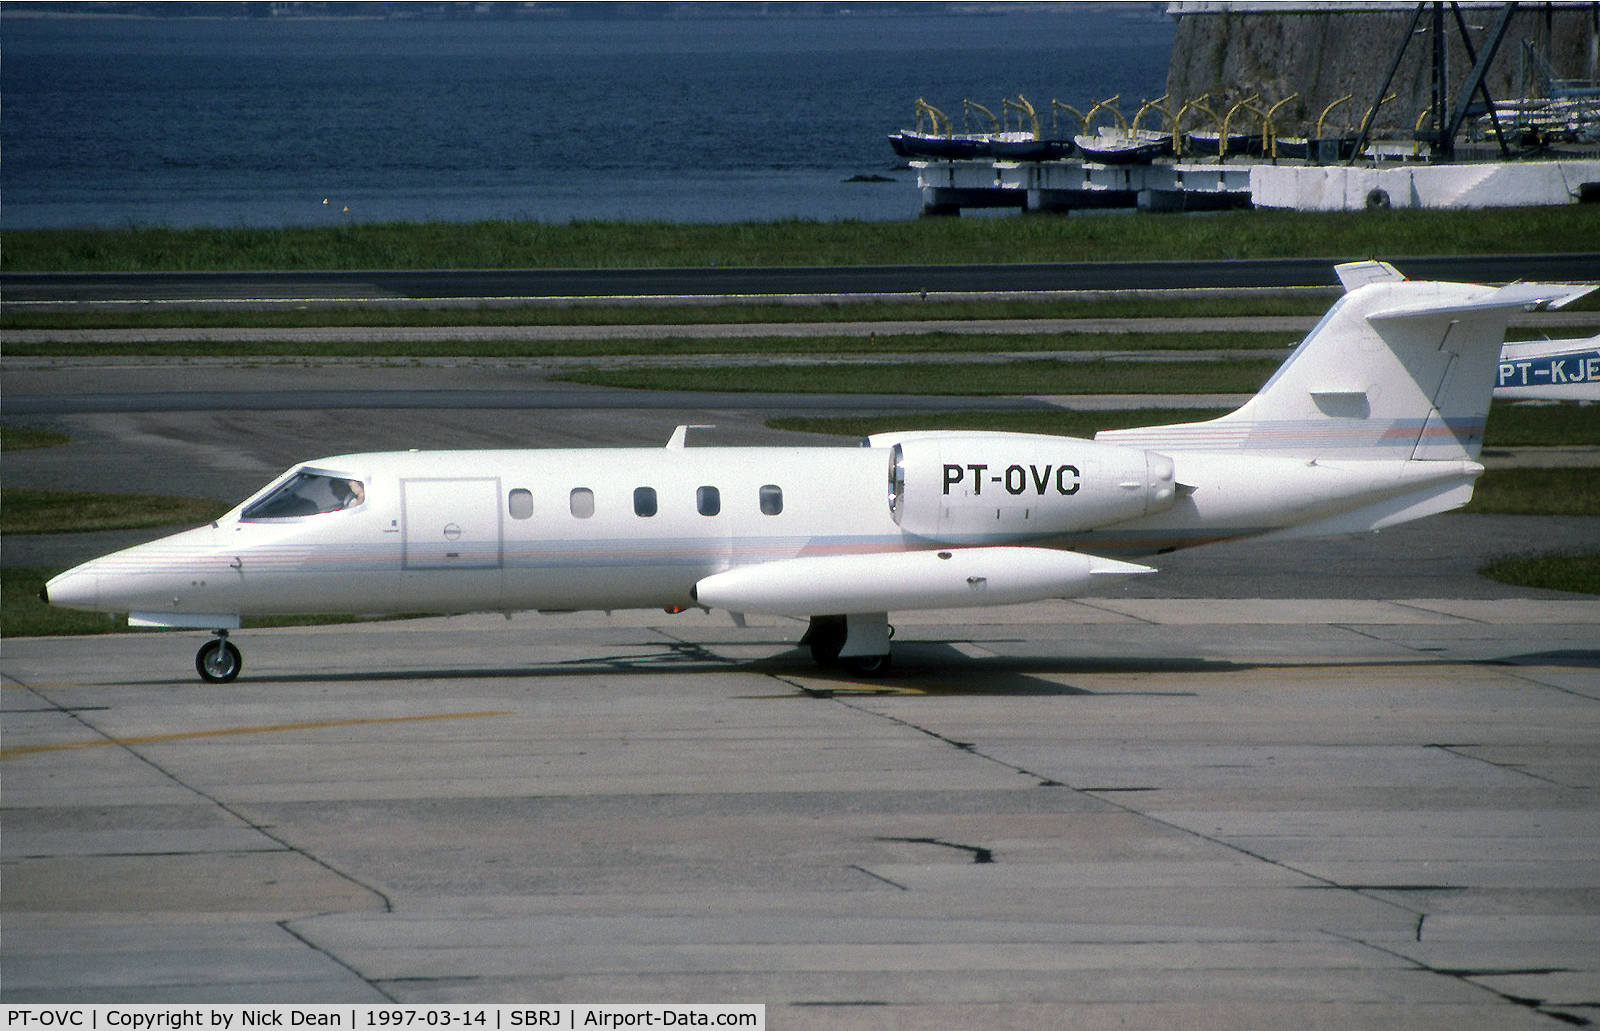 PT-OVC, 1981 Learjet 35A C/N 35A-399, SBRJ W/O 4th Nov 2007 after crashing into homes after takeoff from Sao Paulo 6+ fatalities on the ground plus all on board